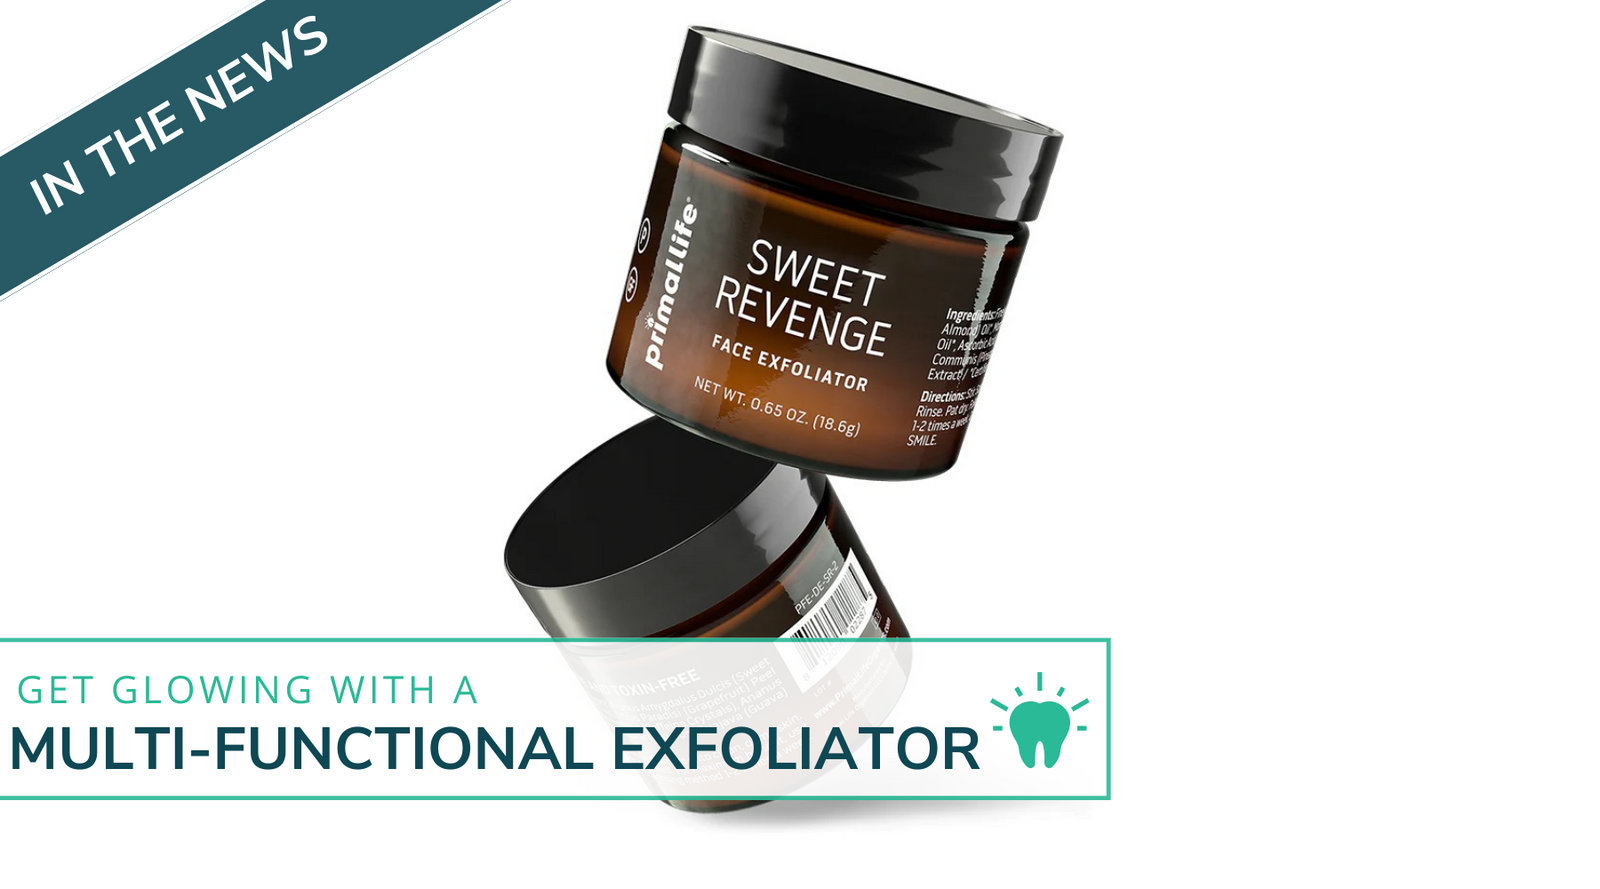 Get Glowing With A Multifunctional Exfoliator